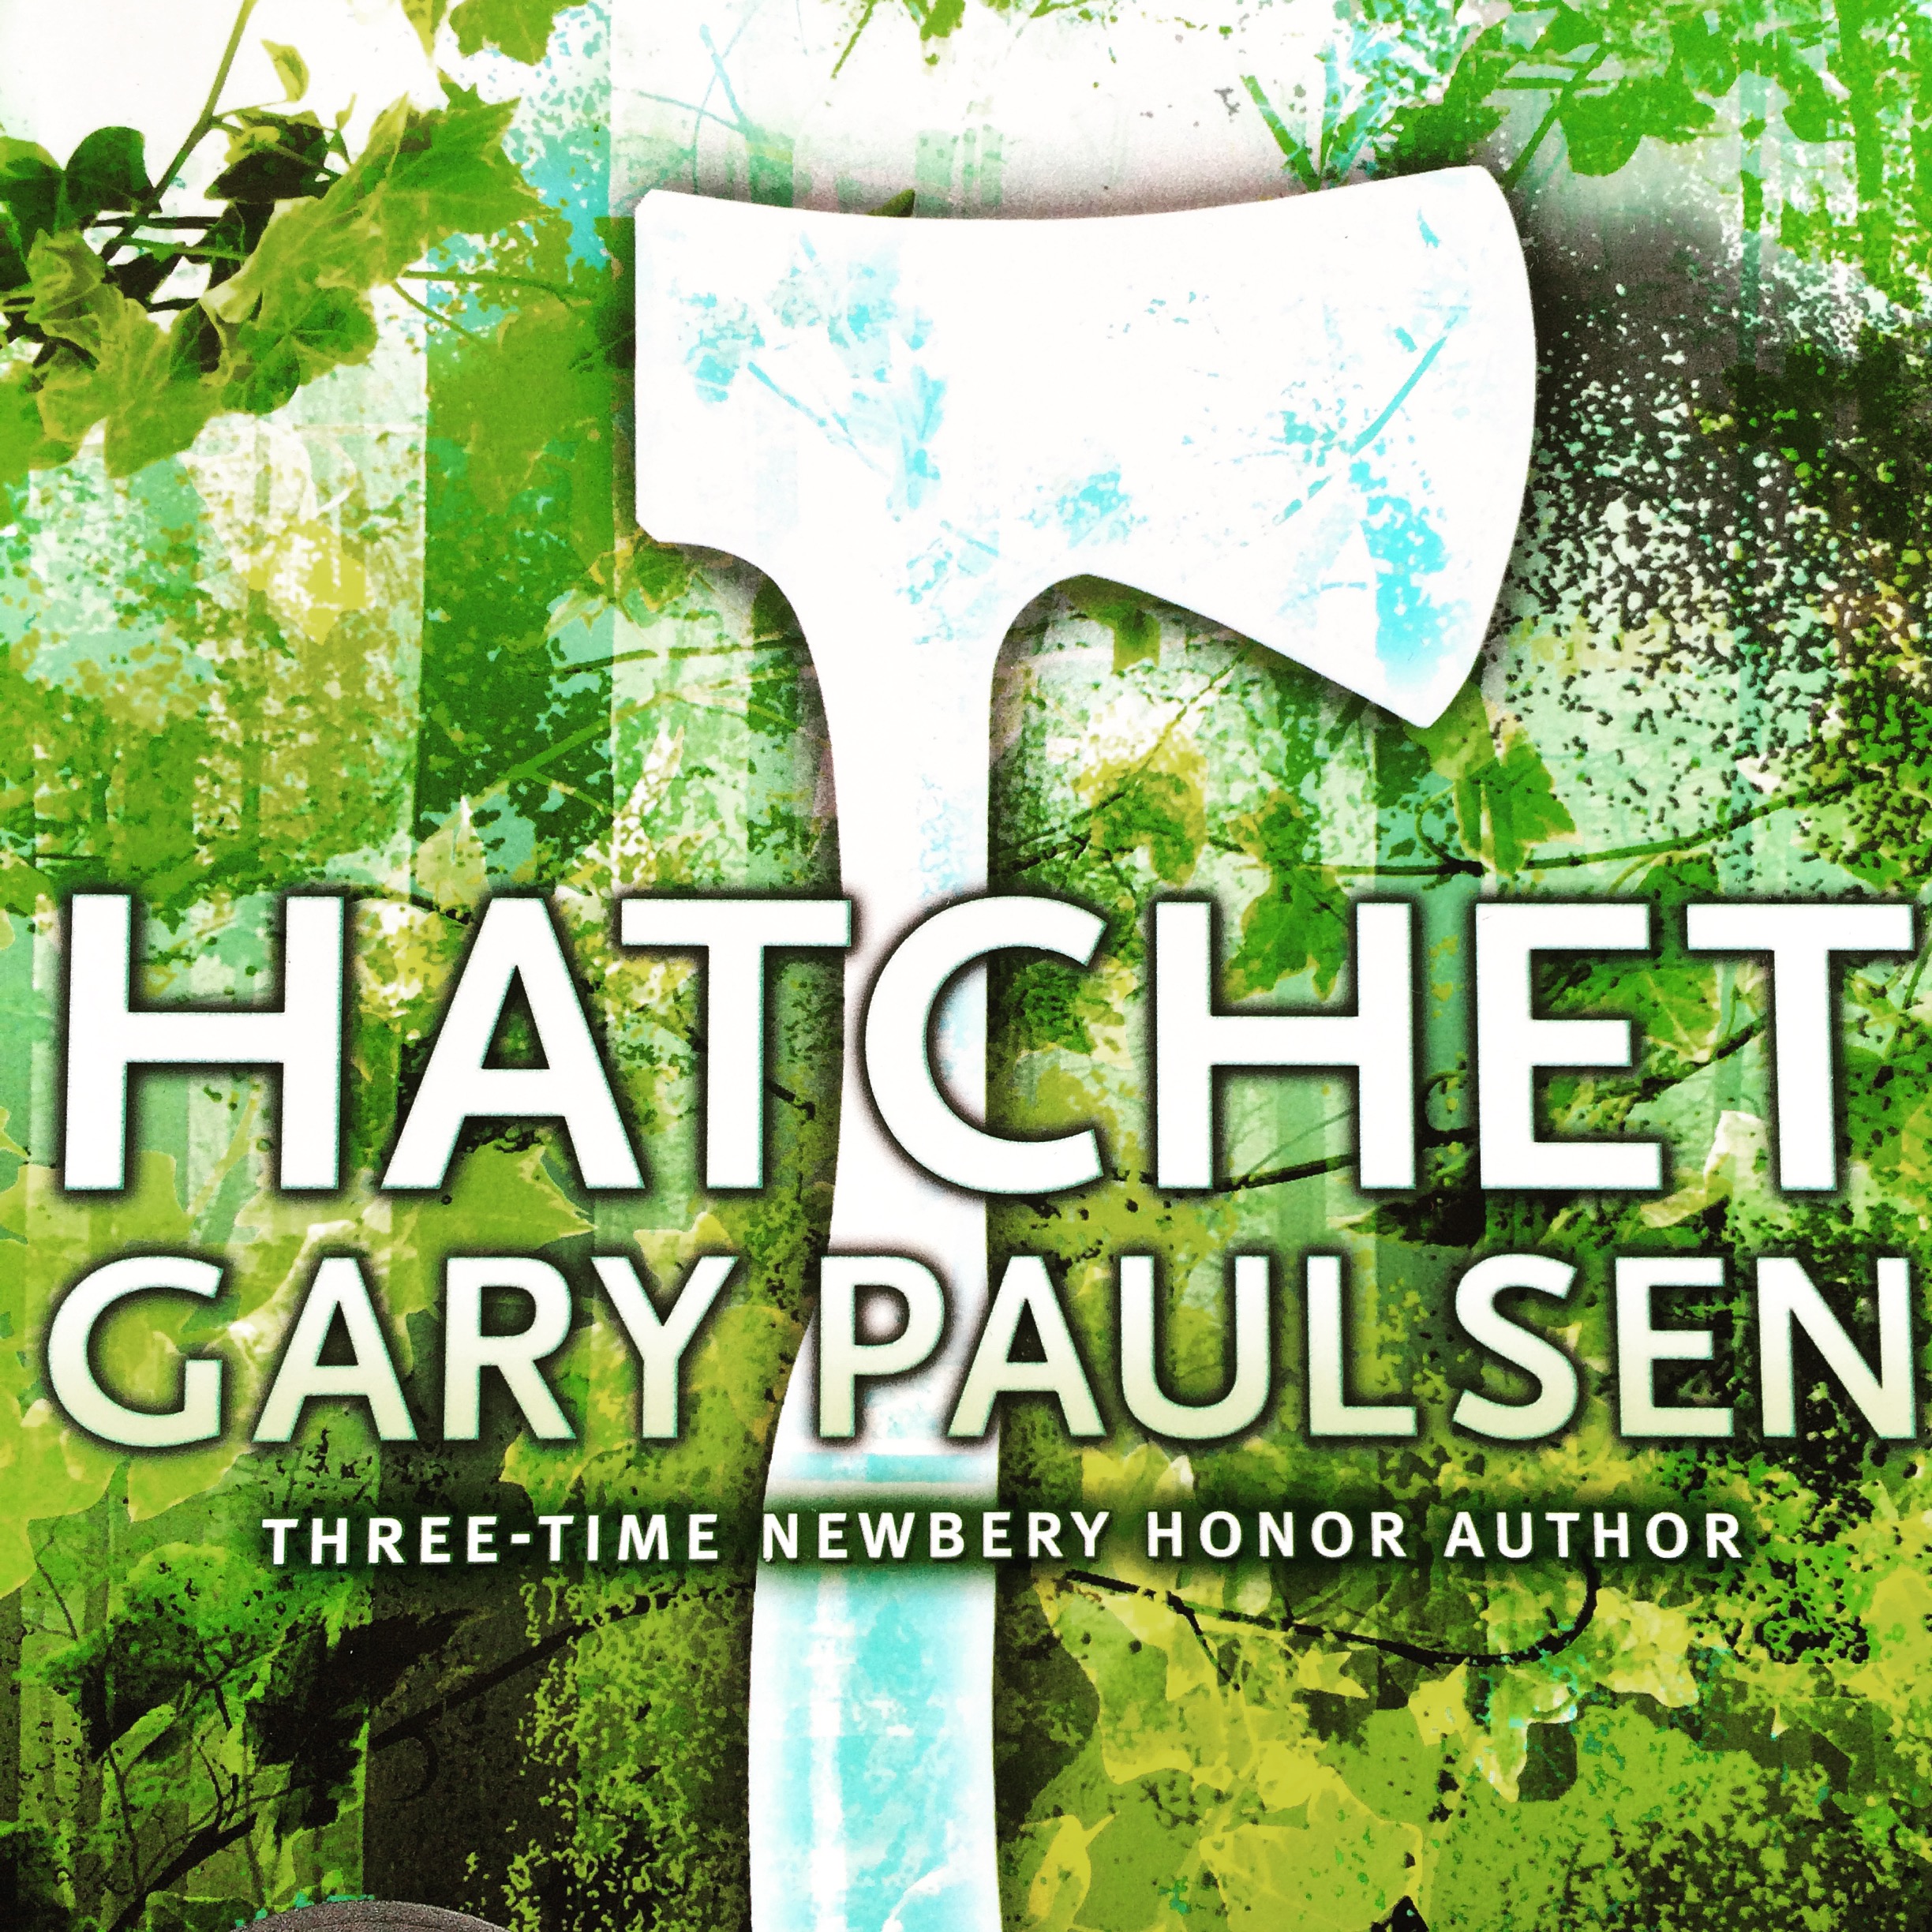 What are the titles of the five books in the Hatchet series by Gary Paulsen?